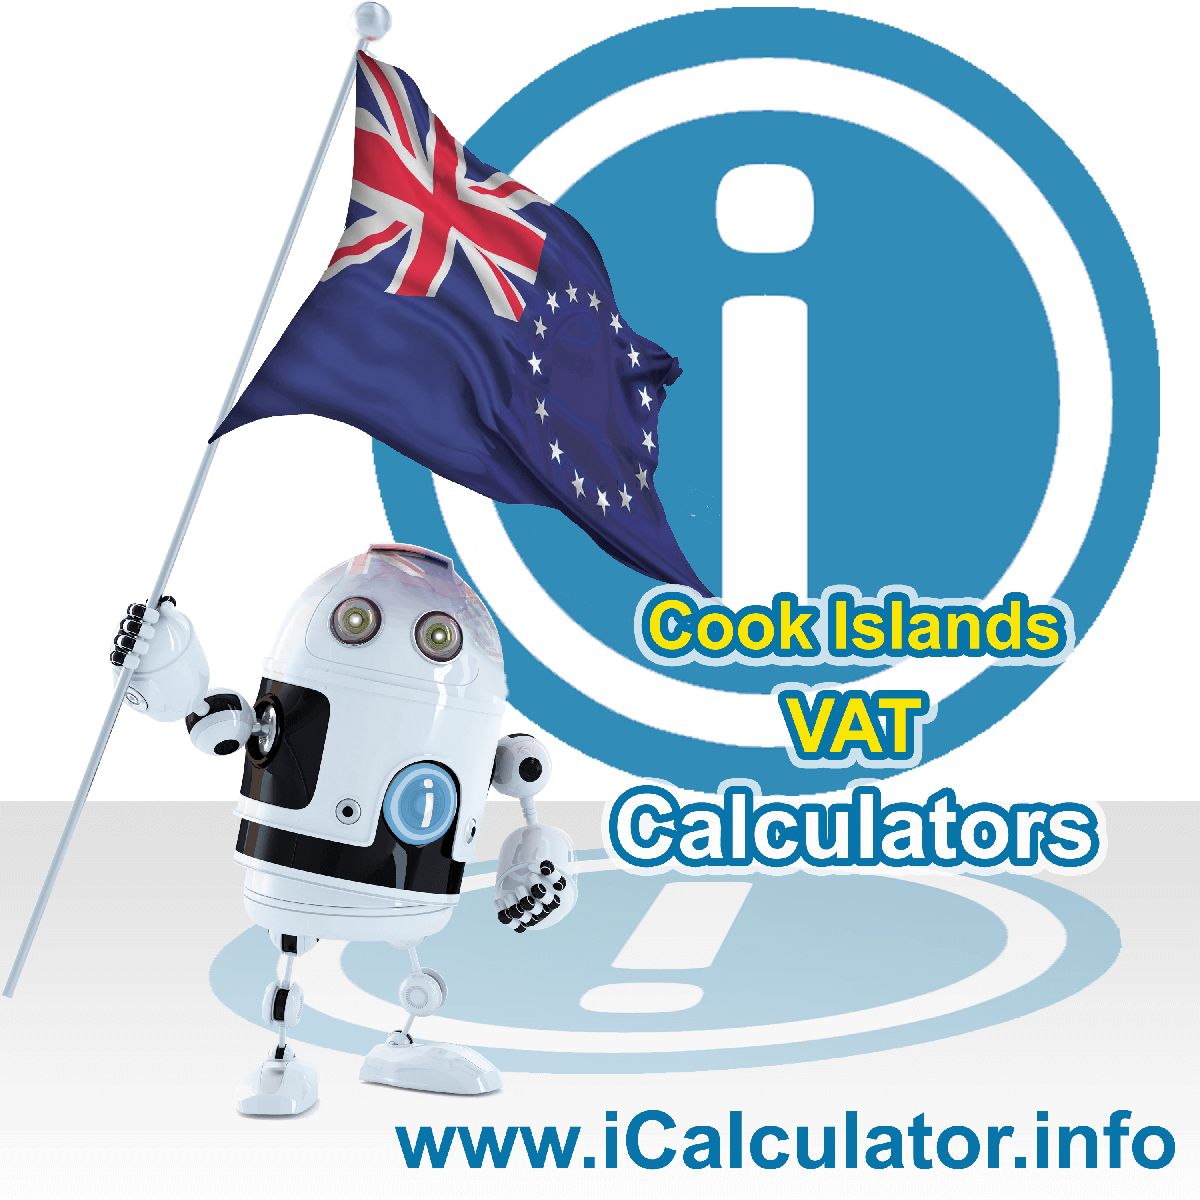 Cook Islands VAT Calculator. This image shows the Cook Islands flag and information relating to the VAT formula used for calculating Value Added Tax in Cook Islands using the Cook Islands VAT Calculator in 2023